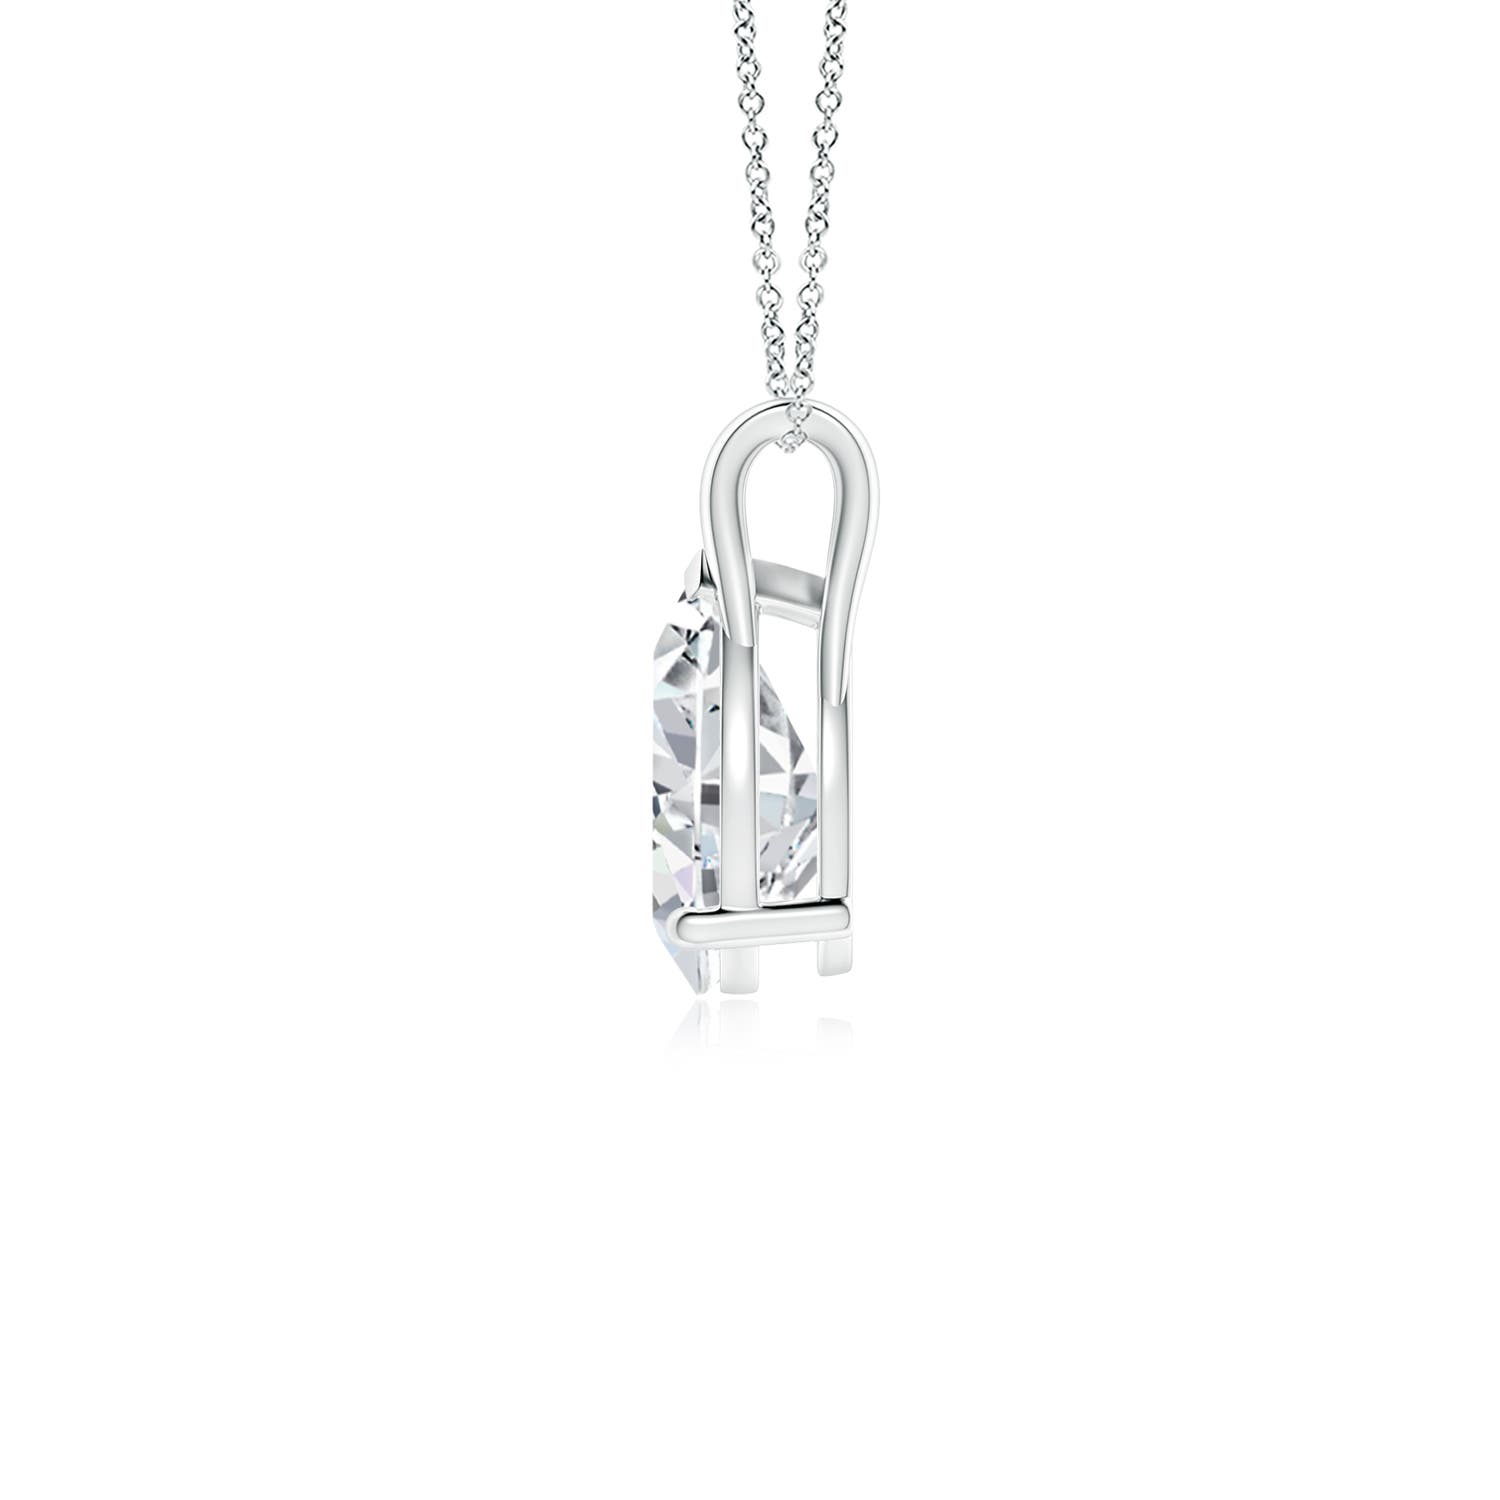 H, SI2 / 1 CT / 14 KT White Gold